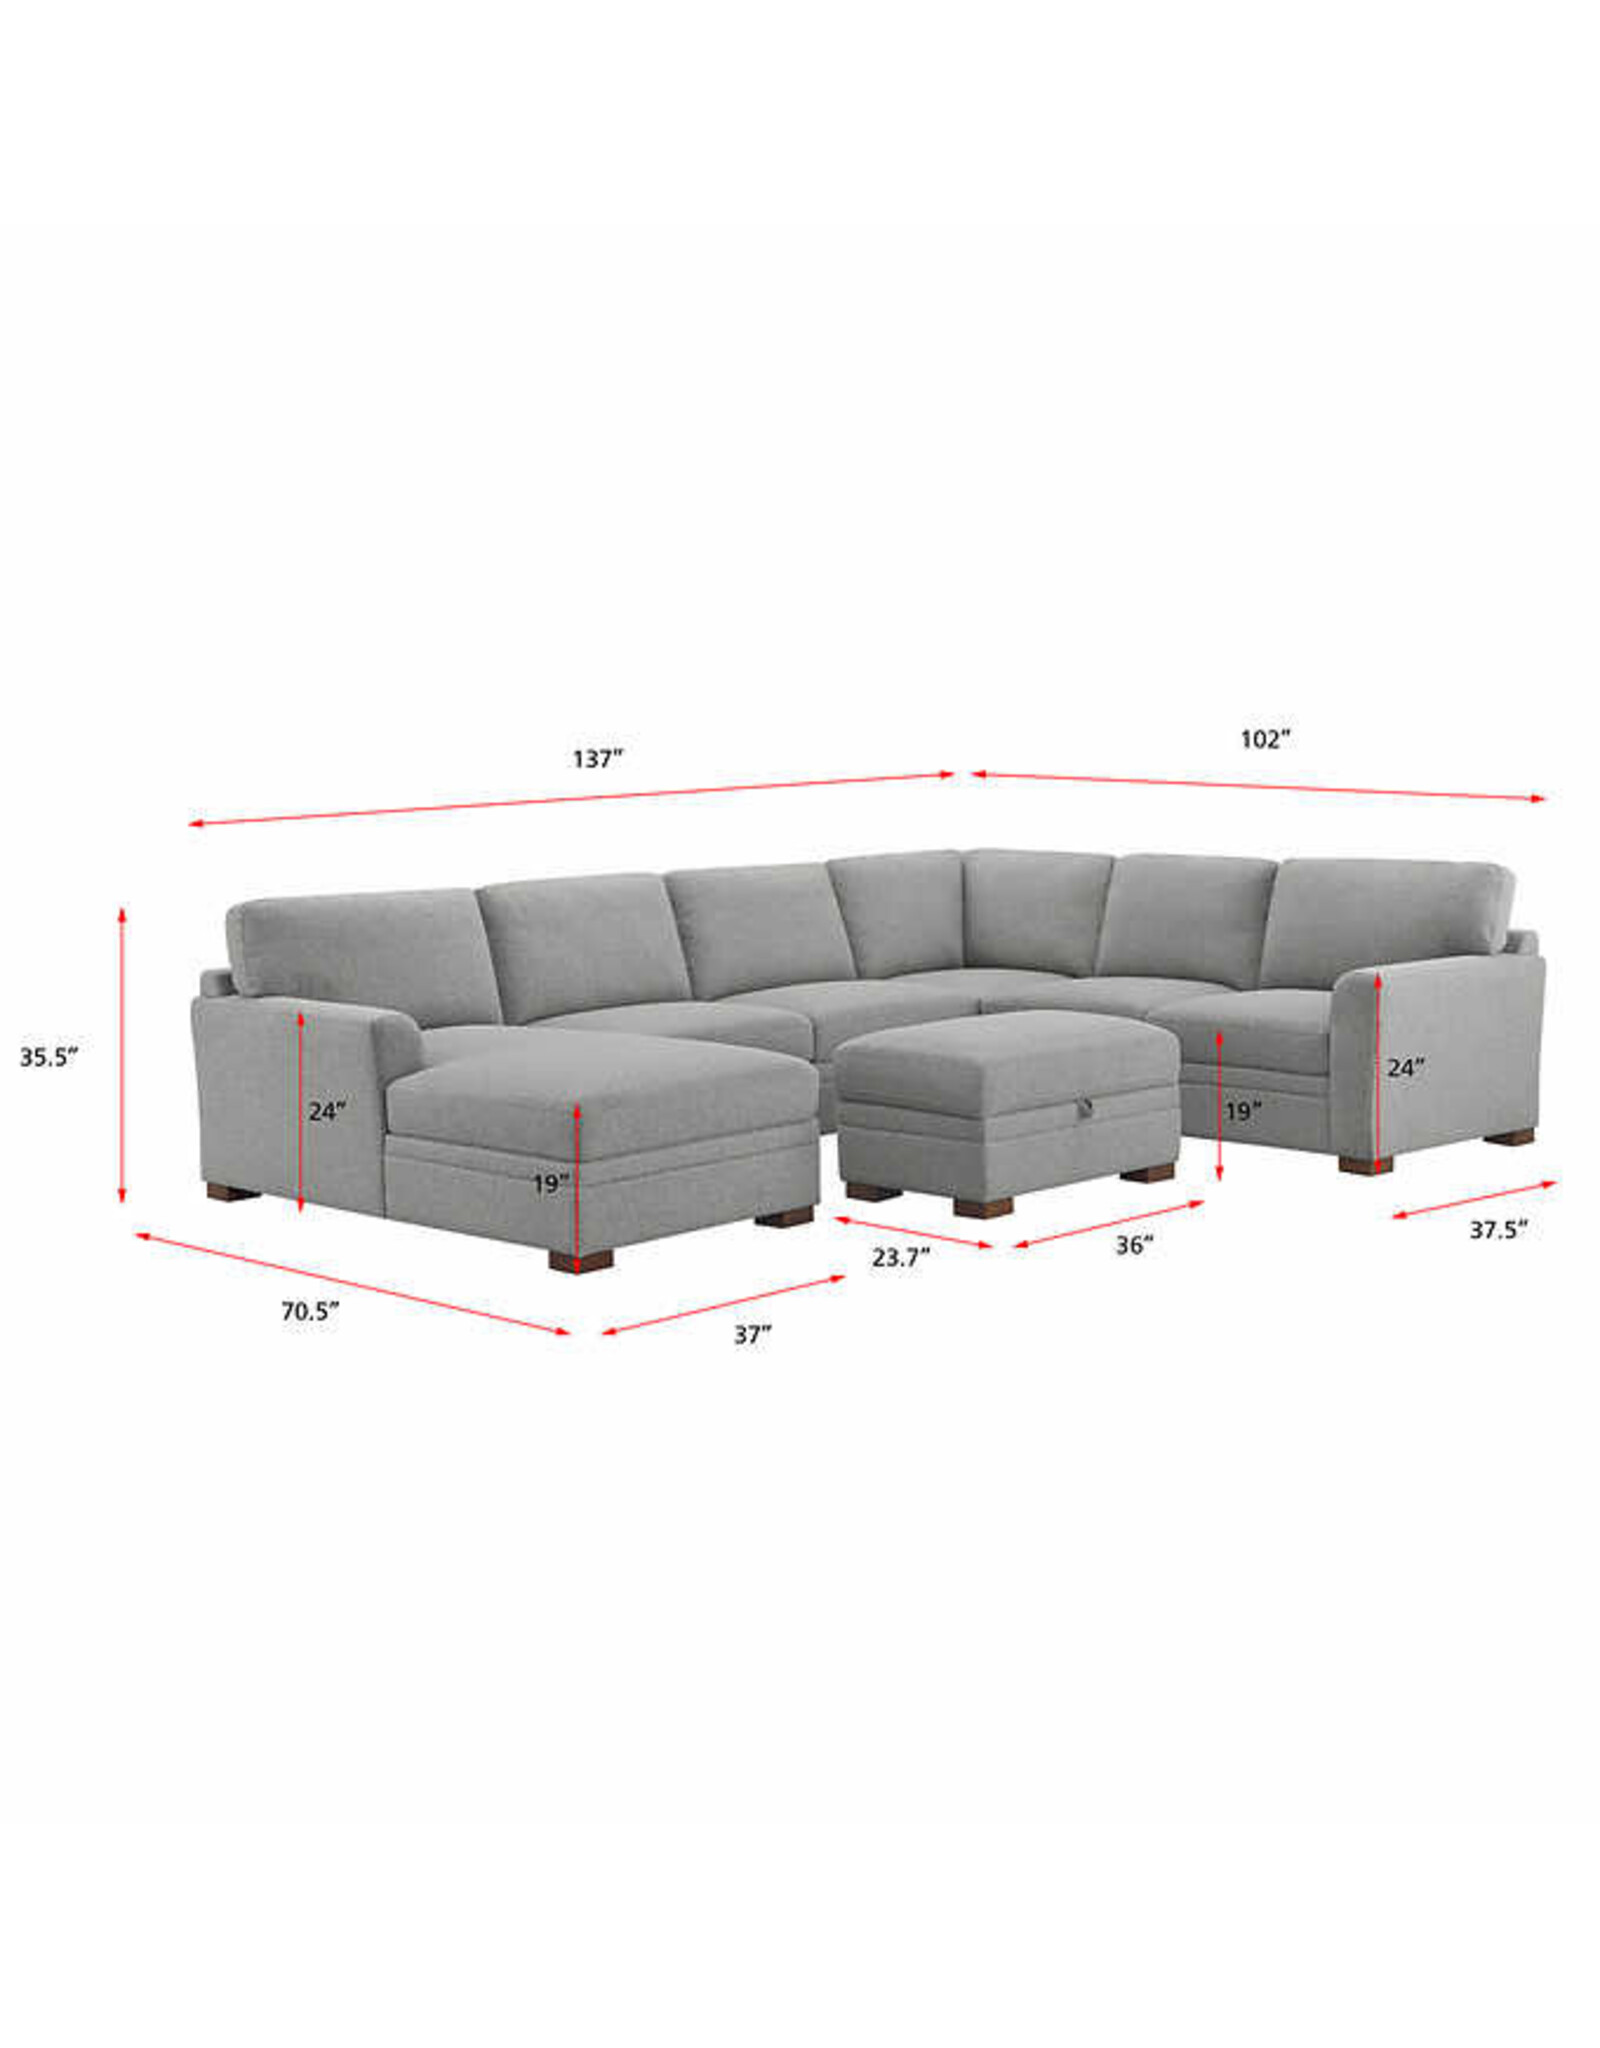 1644998 Thomasville Langdon Fabric Sectional with Storage Ottoman